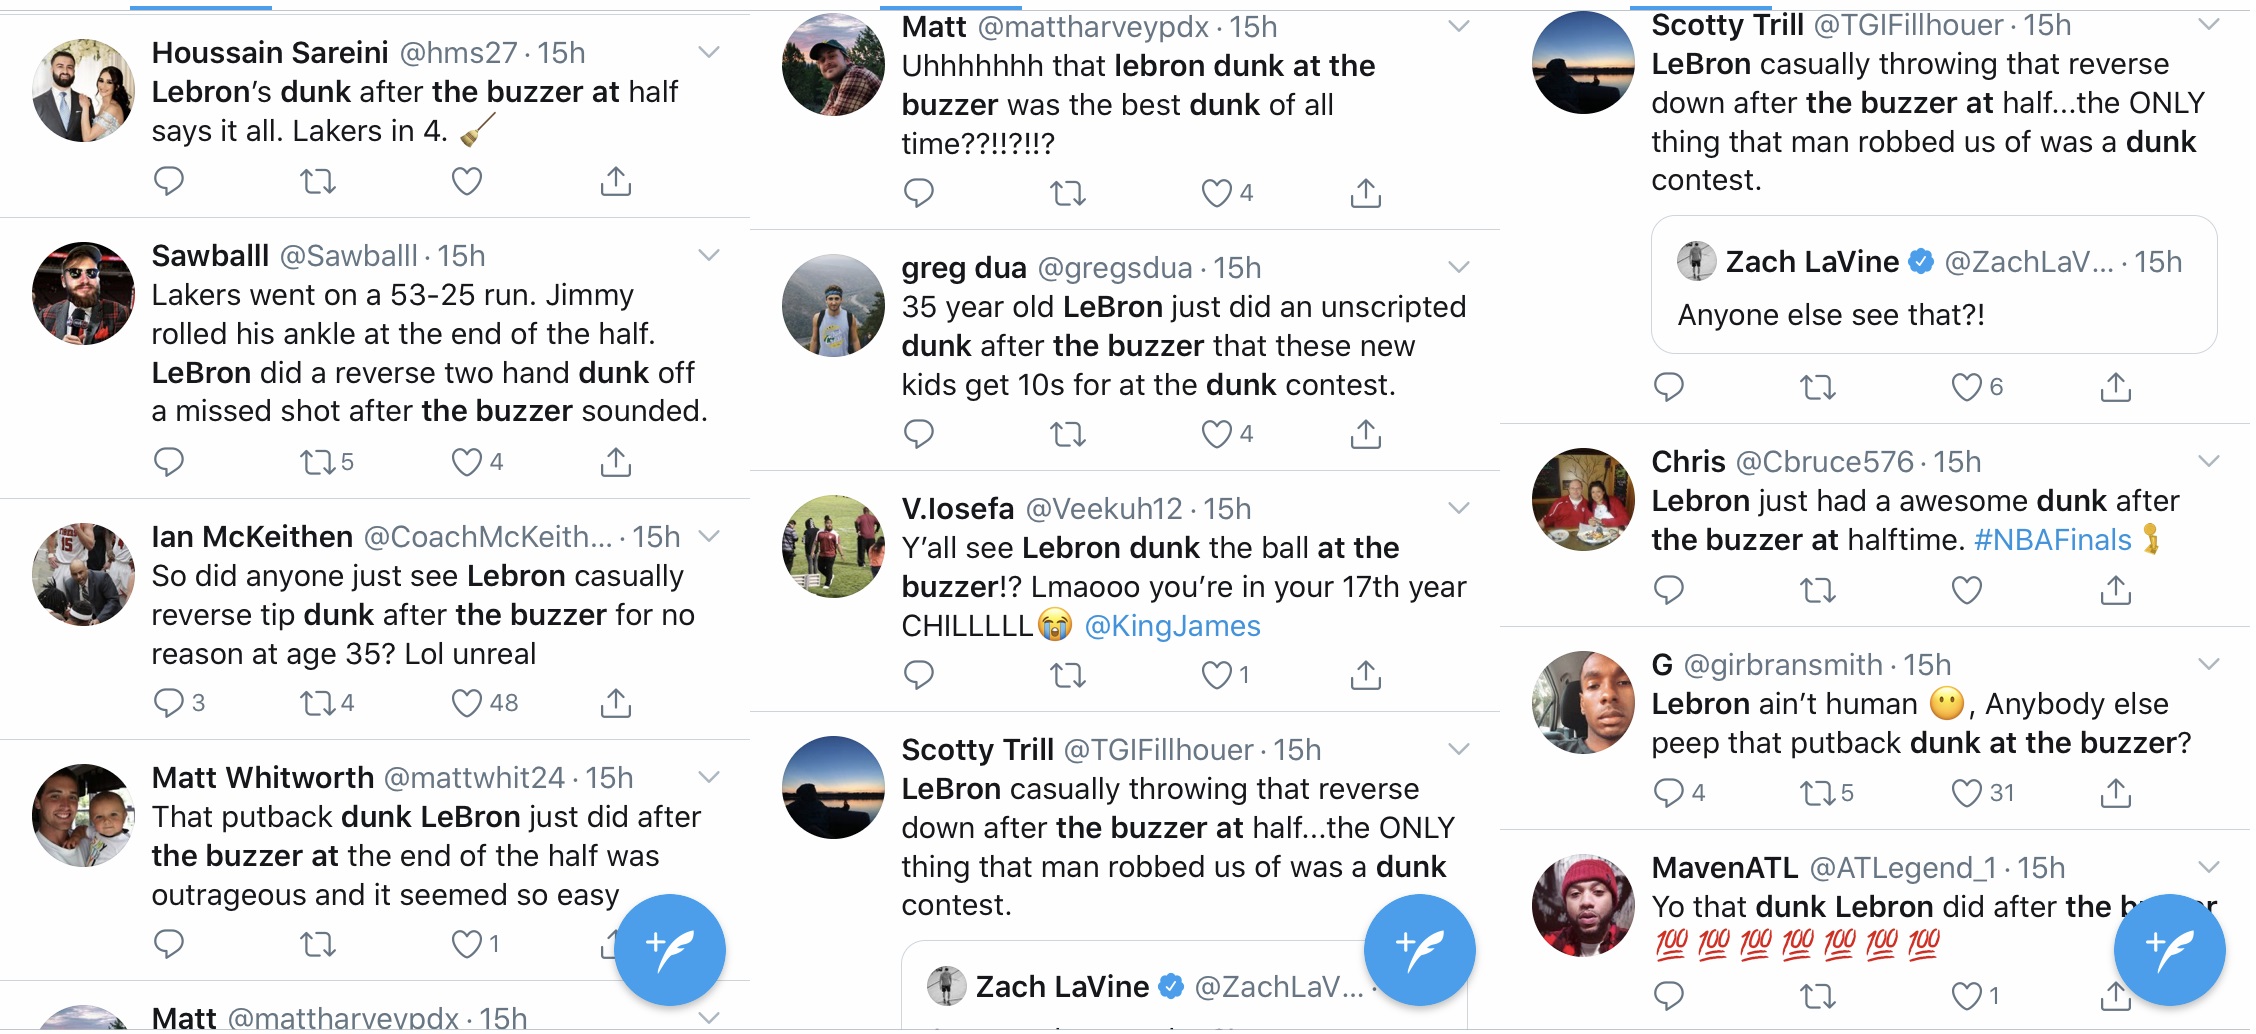 LeBron James was showing off, in Game 1 of the 2020 NBA Finals, against the Miami Heat. His reverse dunk at halftime was just an exhibition, as he went for a reverse dunk, after the buzzer. Twitter was amazed seeing LeBron doing that at the age of 35, just because.